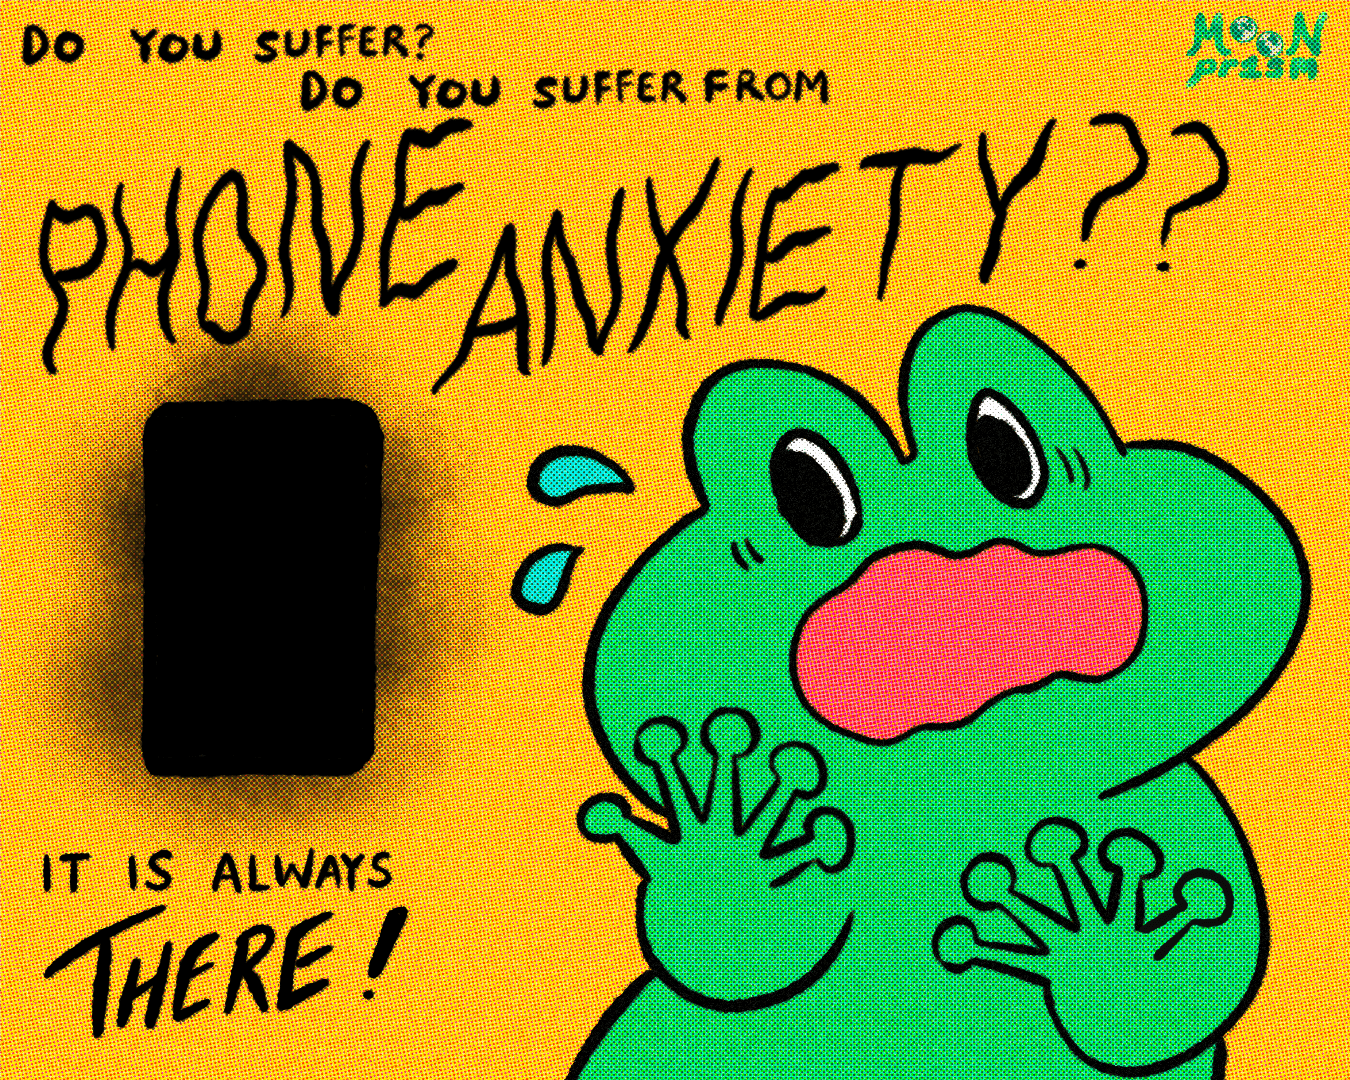 An illustration of a frightened green frog staring at an ominous looking black rectangle. The text reads 'Do you suffer? Do you suffer from phone anxiety? It is always THERE! Poor froggy.'